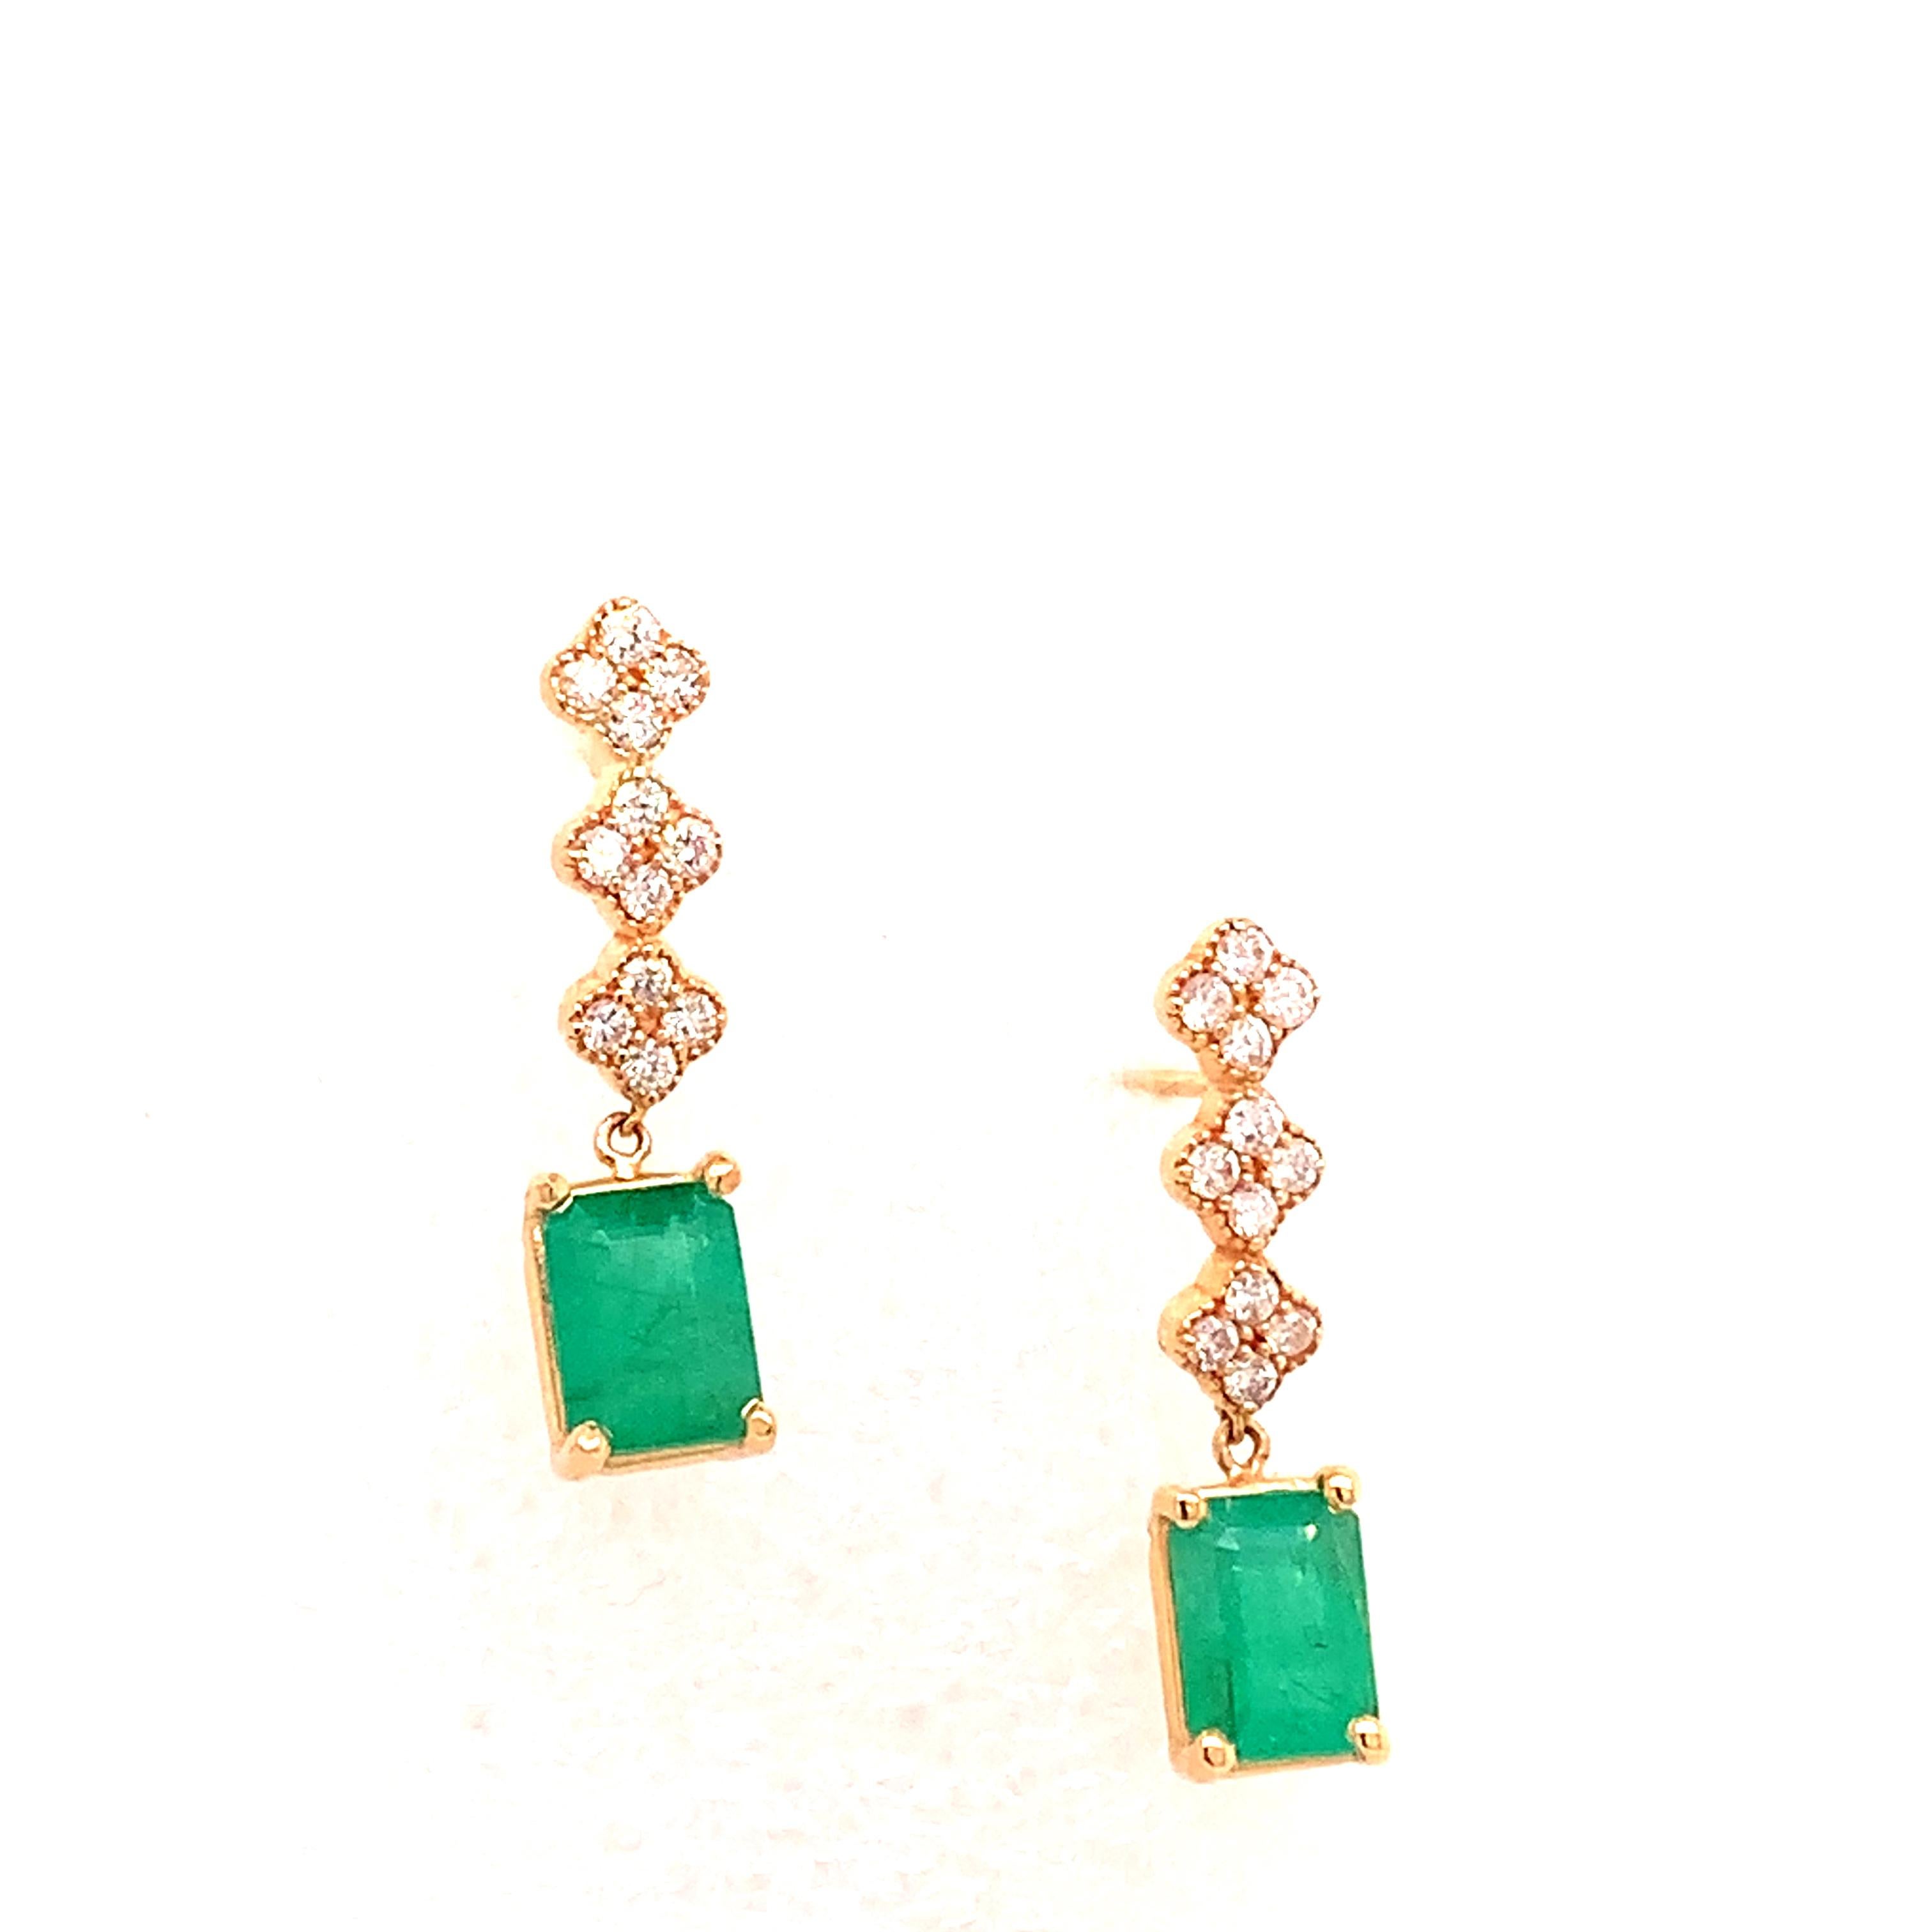 Natural Finely Faceted Quality Emerald Diamond Earrings 14k Gold 3.25 TCW Certified $4,950 111554

This is a Unique Custom Made Glamorous Piece of Jewelry!

Nothing says, “I Love you” more than Diamonds and Pearls!

This pair of Emerald earrings has